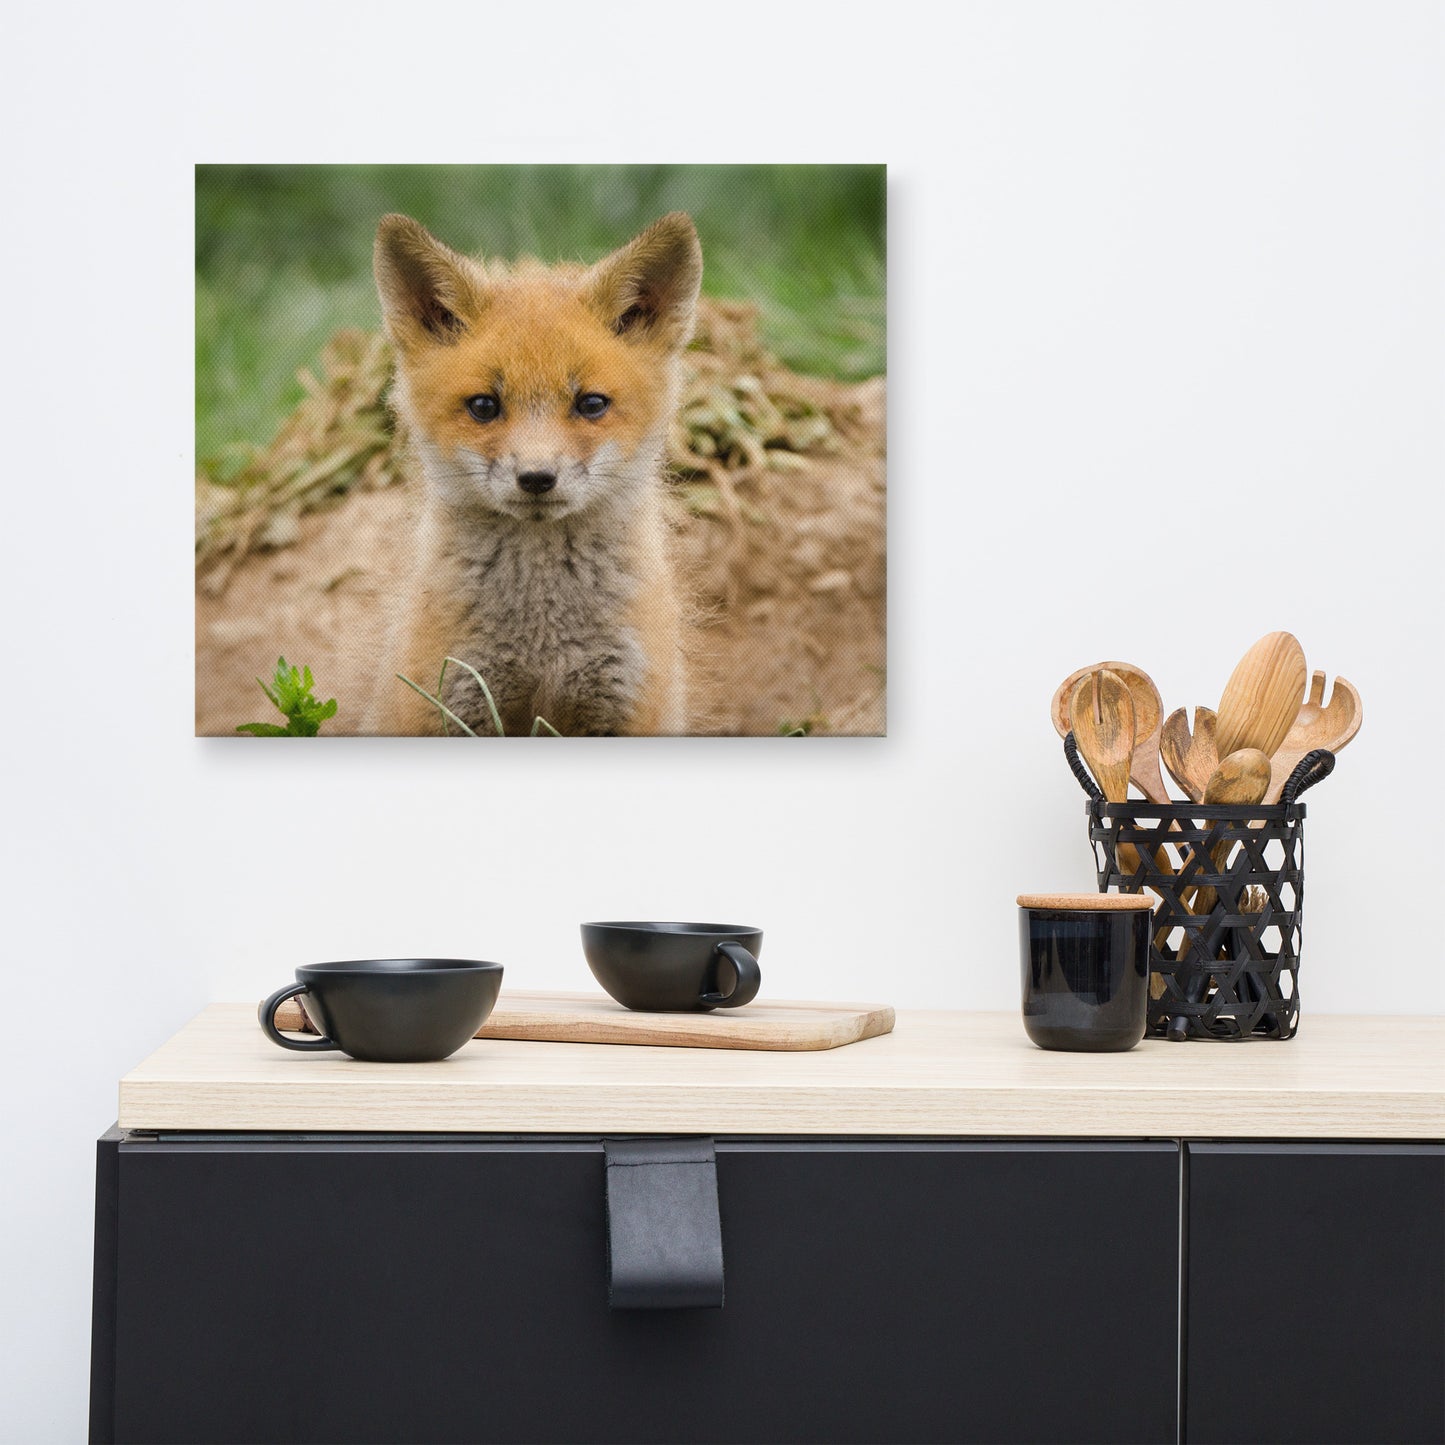 Modern Wall Art For Dining Room: Young Red Fox Kit Popping Out of Den- Wildlife / Animal / Nature Photograph Canvas Wall Art Print - Artwork